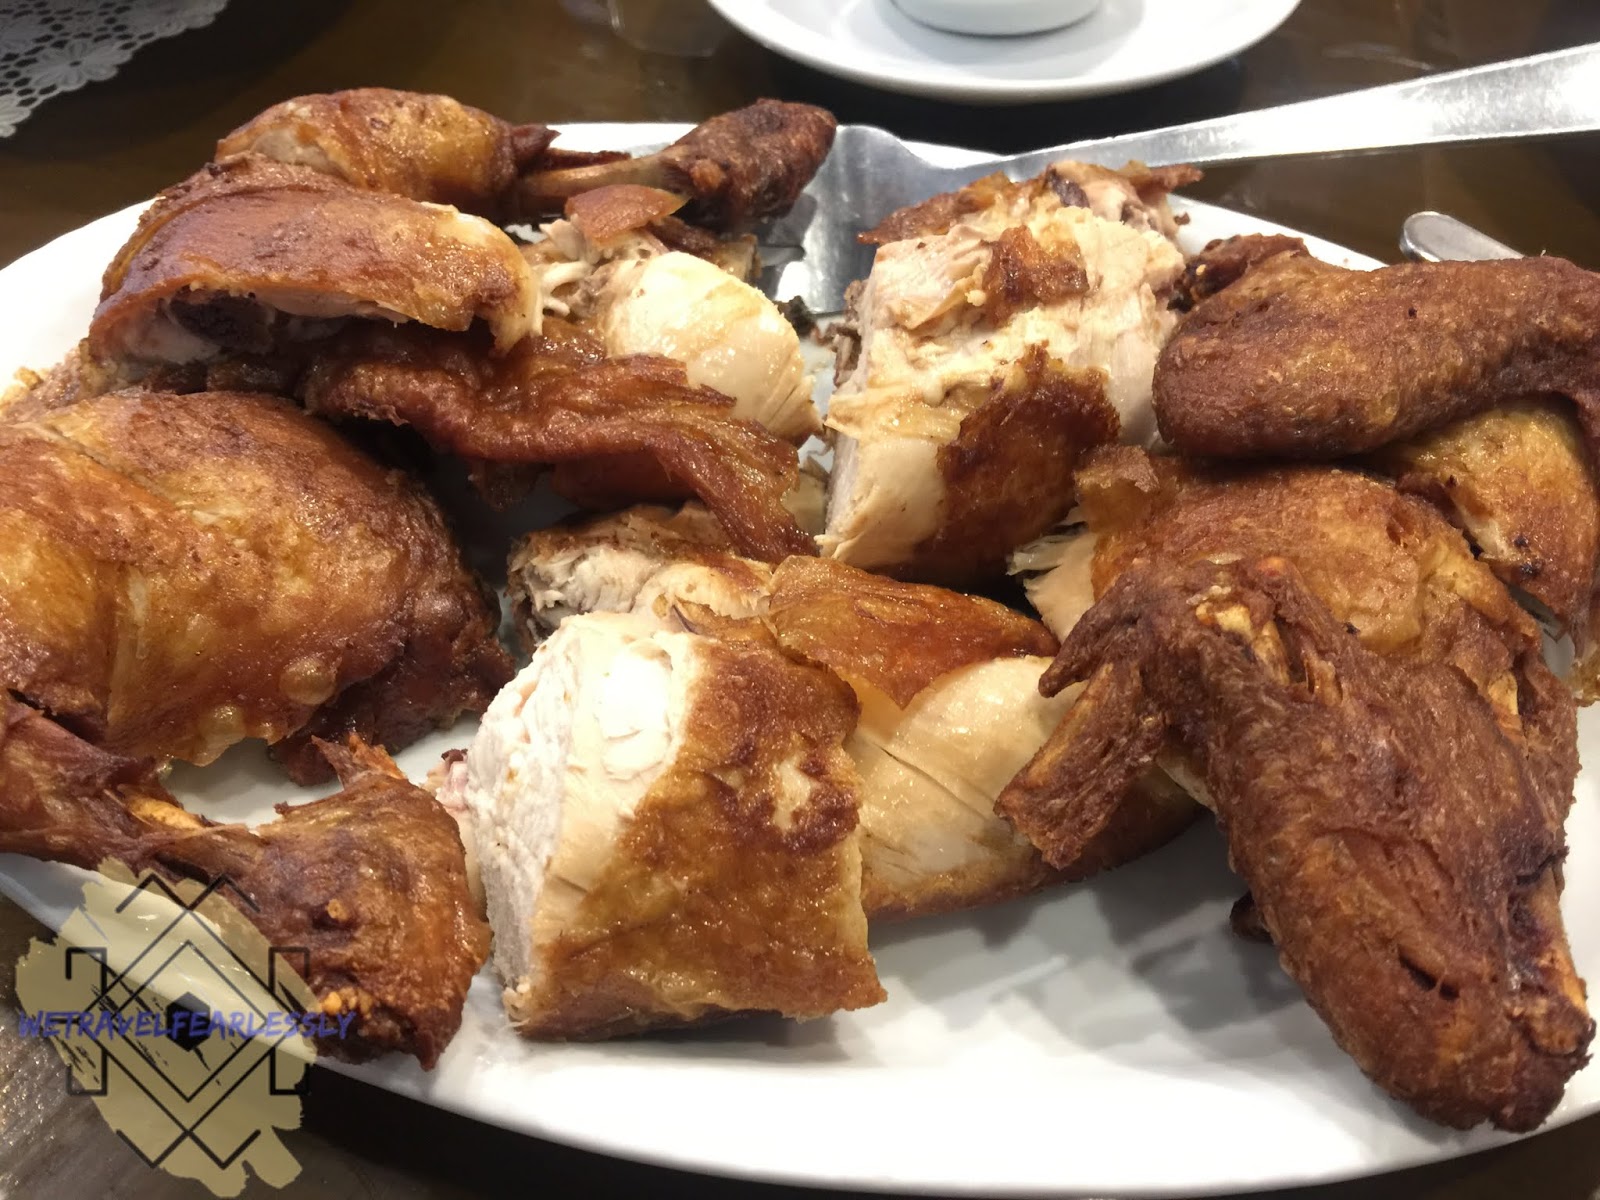 Tainan Fried Chicken (PHP235) - Tien Ma's Taiwanese Cuisine in Libis, Quezon City - WTF Review